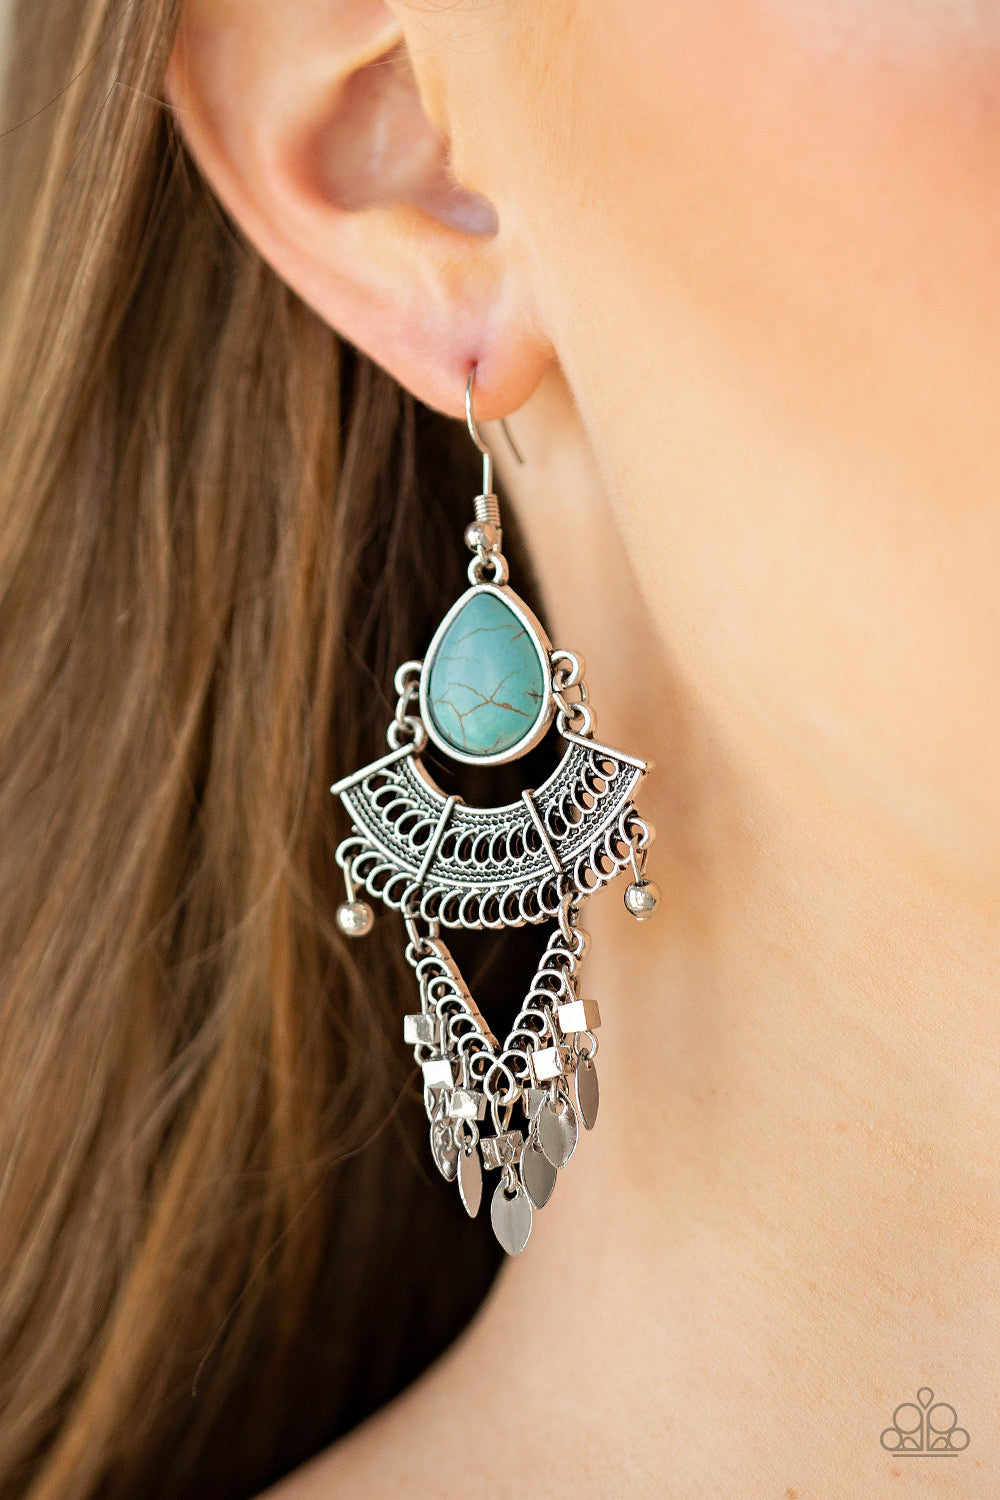 Paparazzi Vintage Vagabond Blue Fishhook Earrings - Life Of The Party Exclusive February 2020